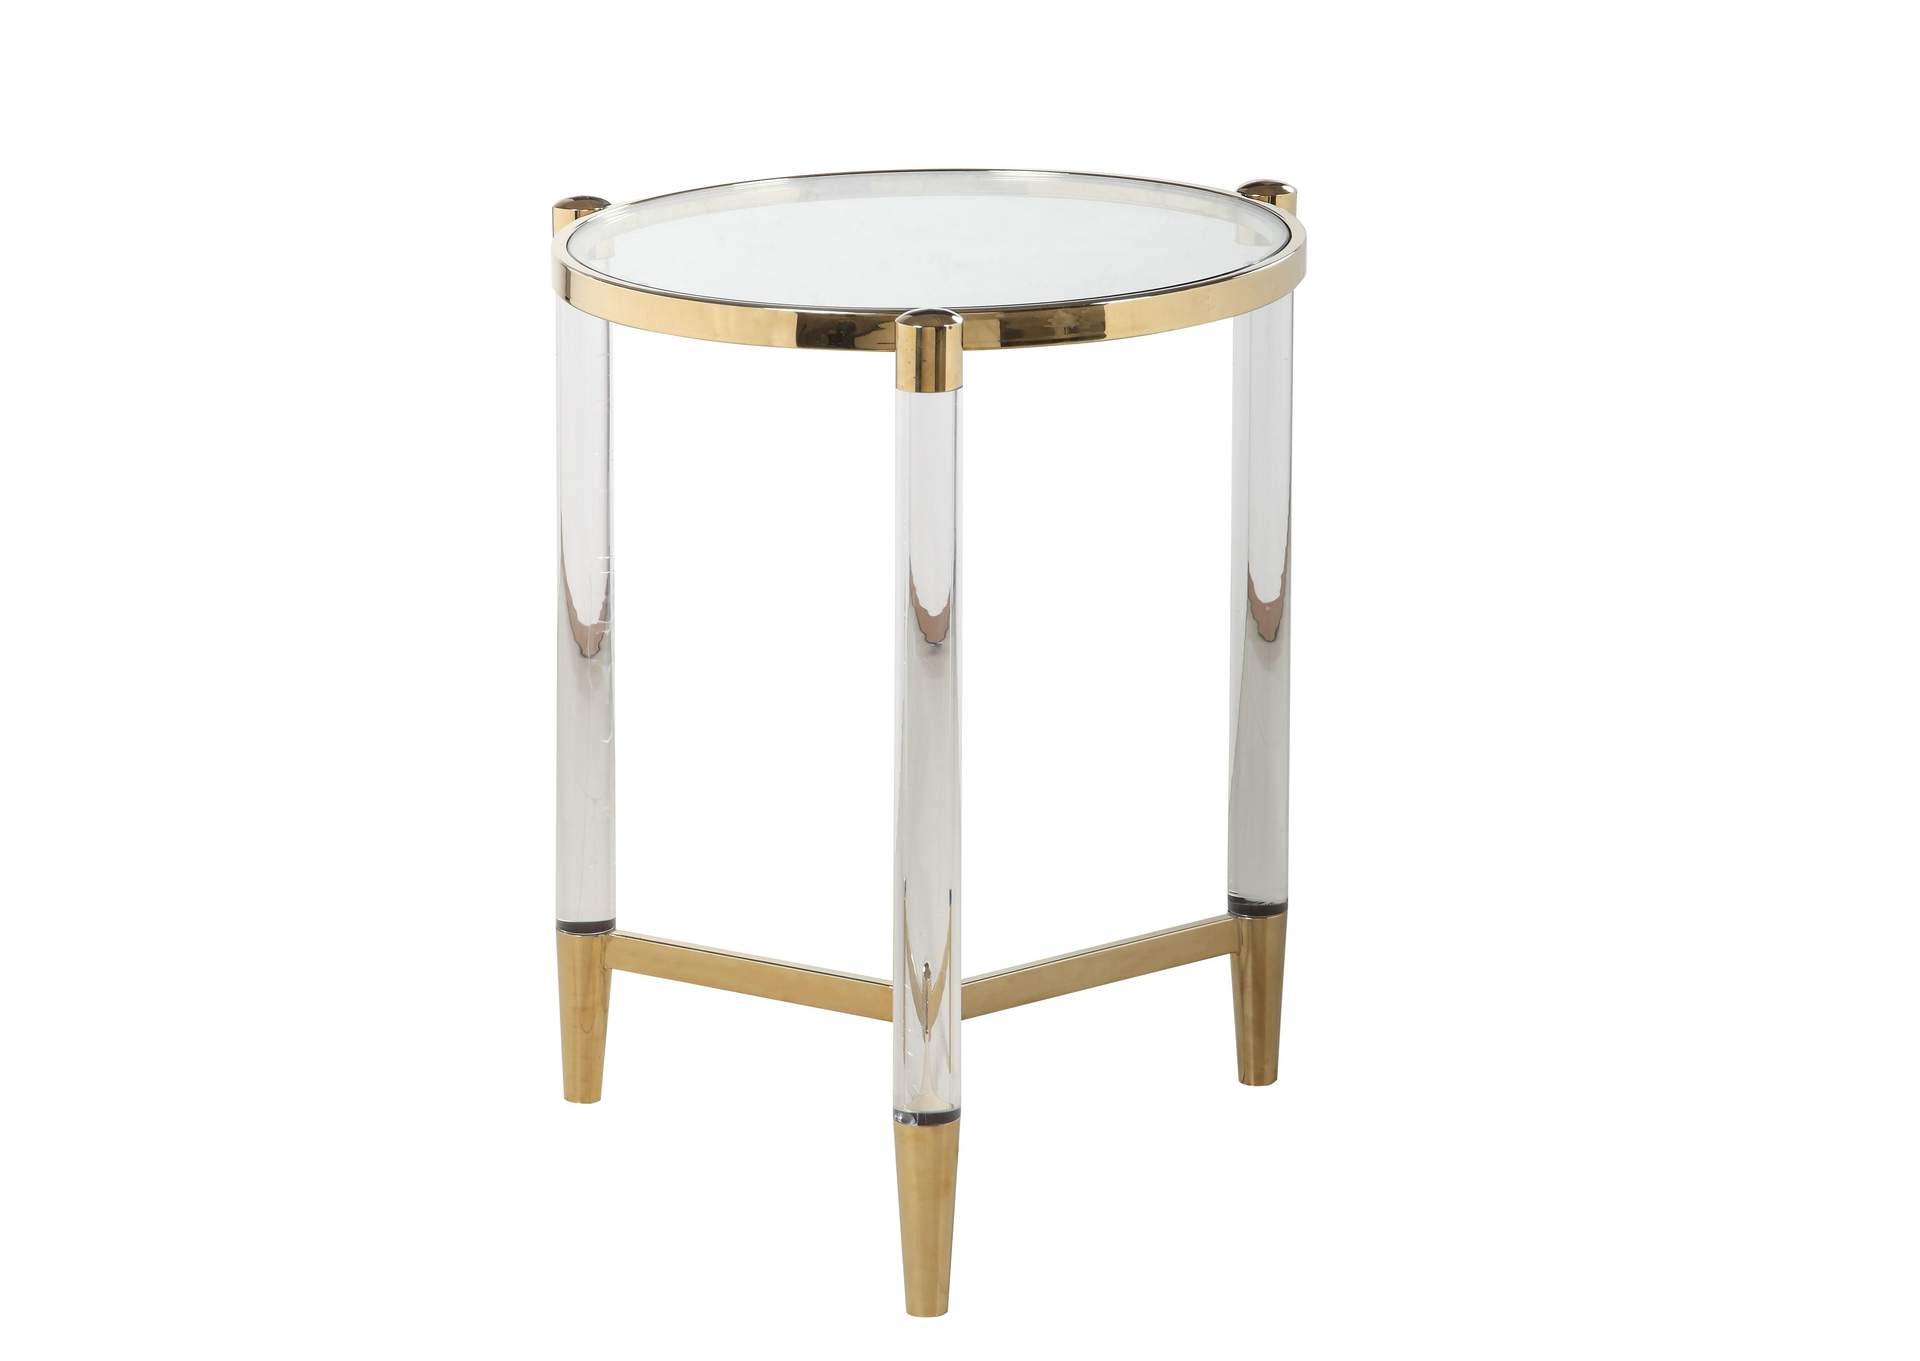 Denali Brass Round Tempered Glass Lamp Table,Chintaly Imports